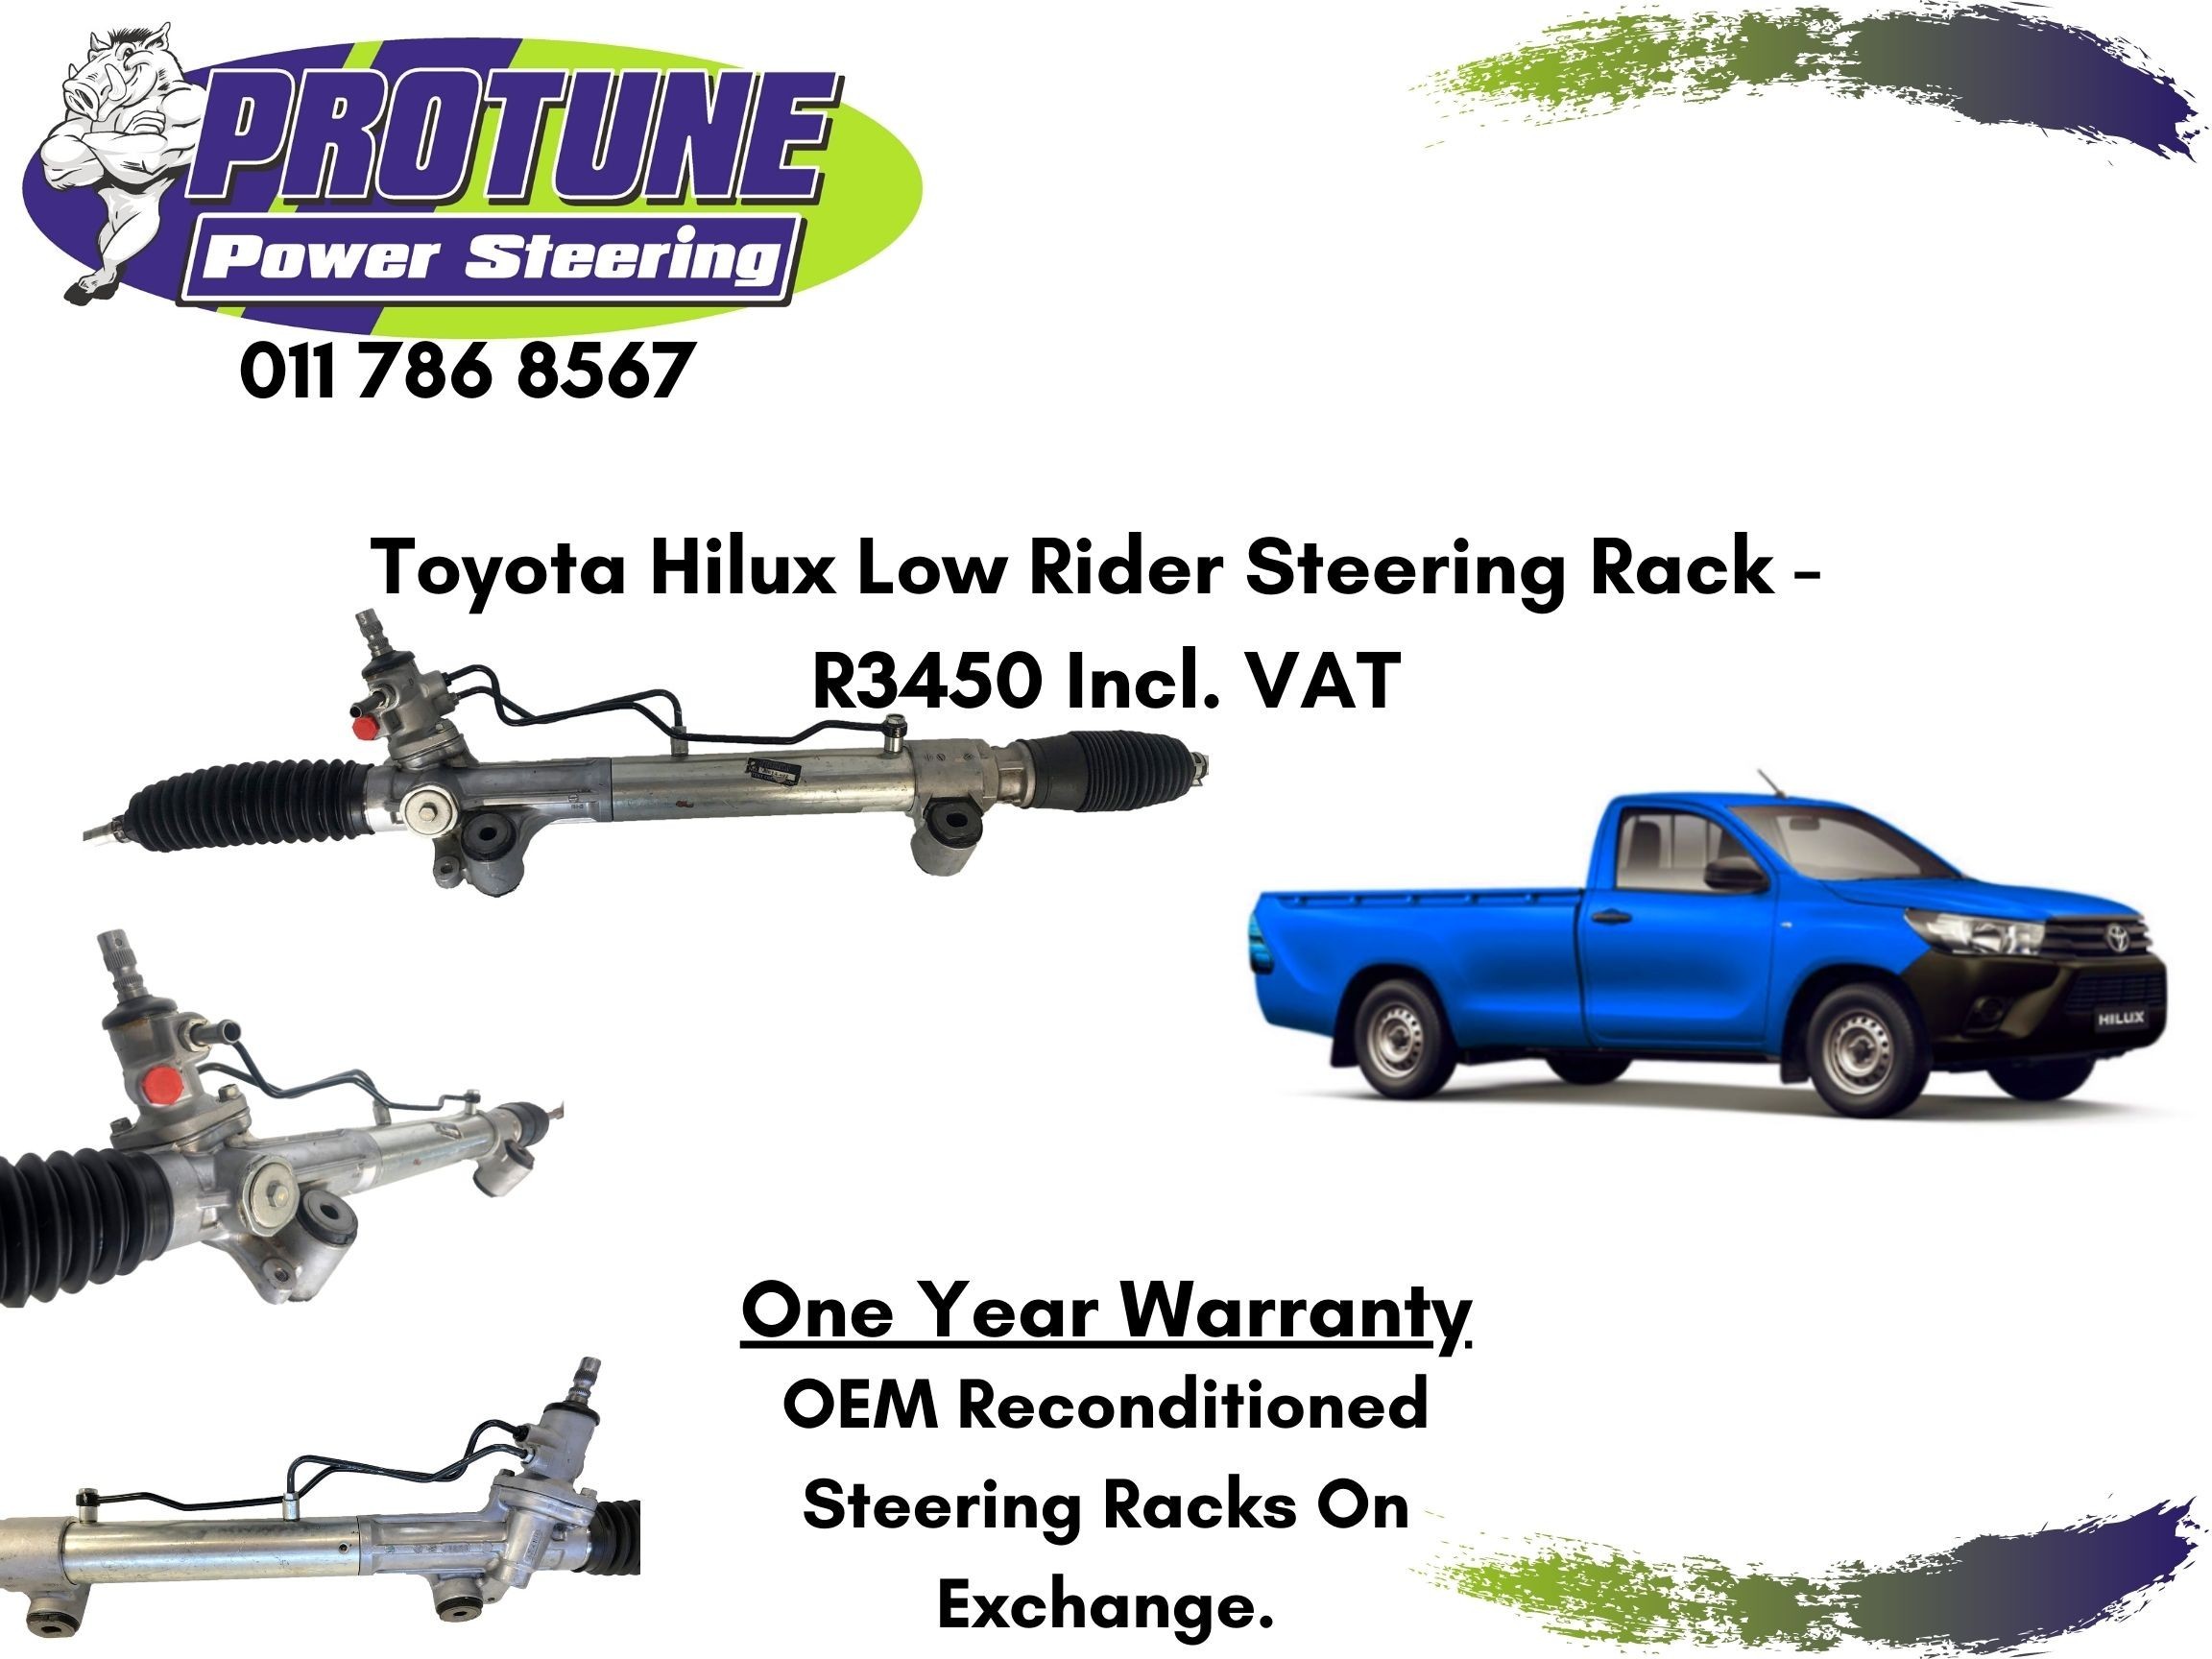 Toyota Hilux Low Rider  OEM Reconditioned Steering Racks